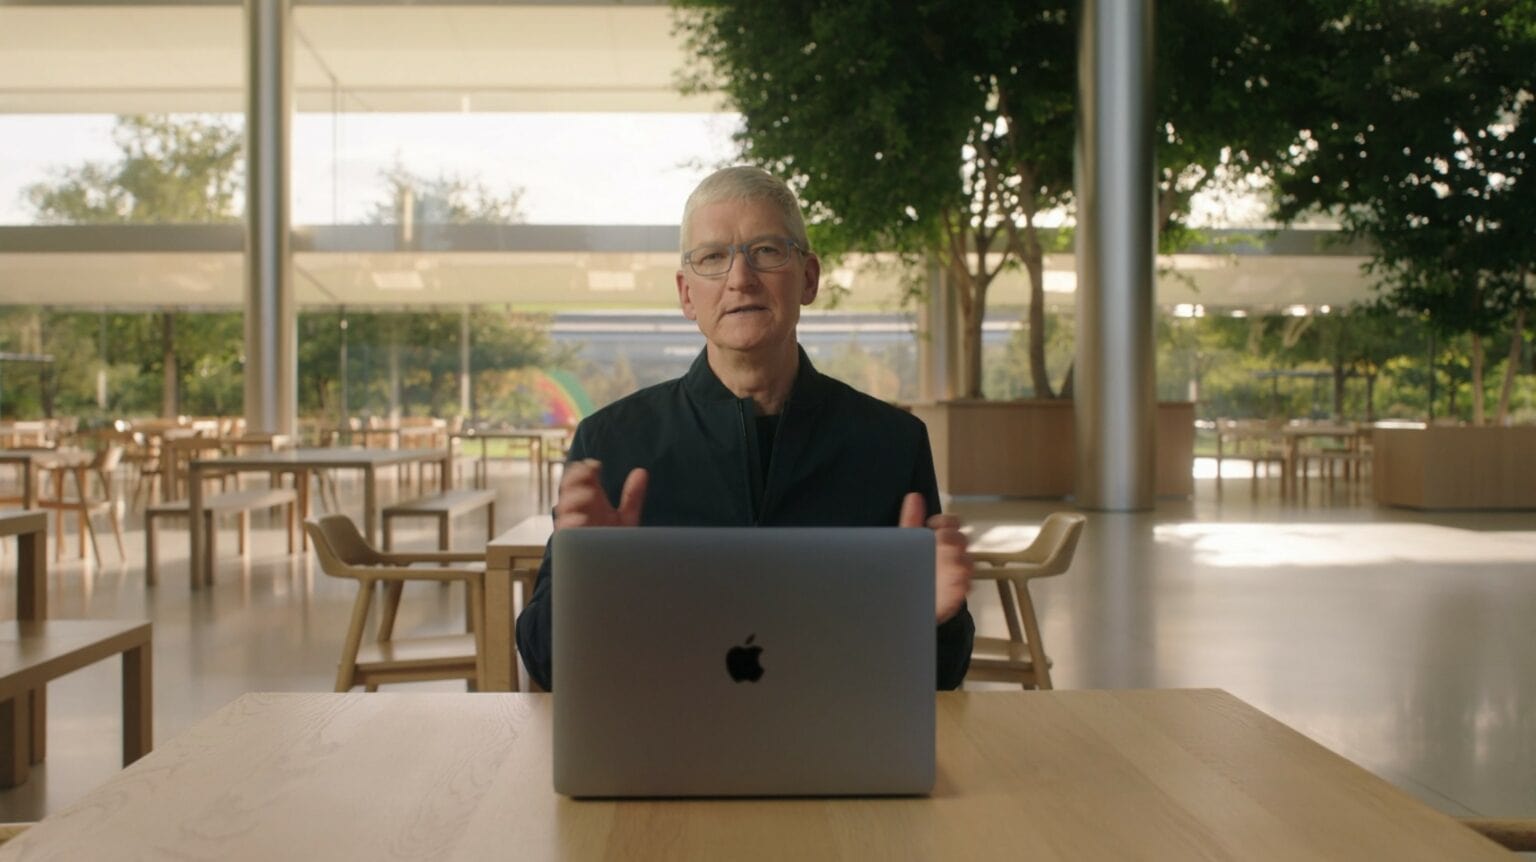 Apple continues to soar under Tim Cook's assured leadership.